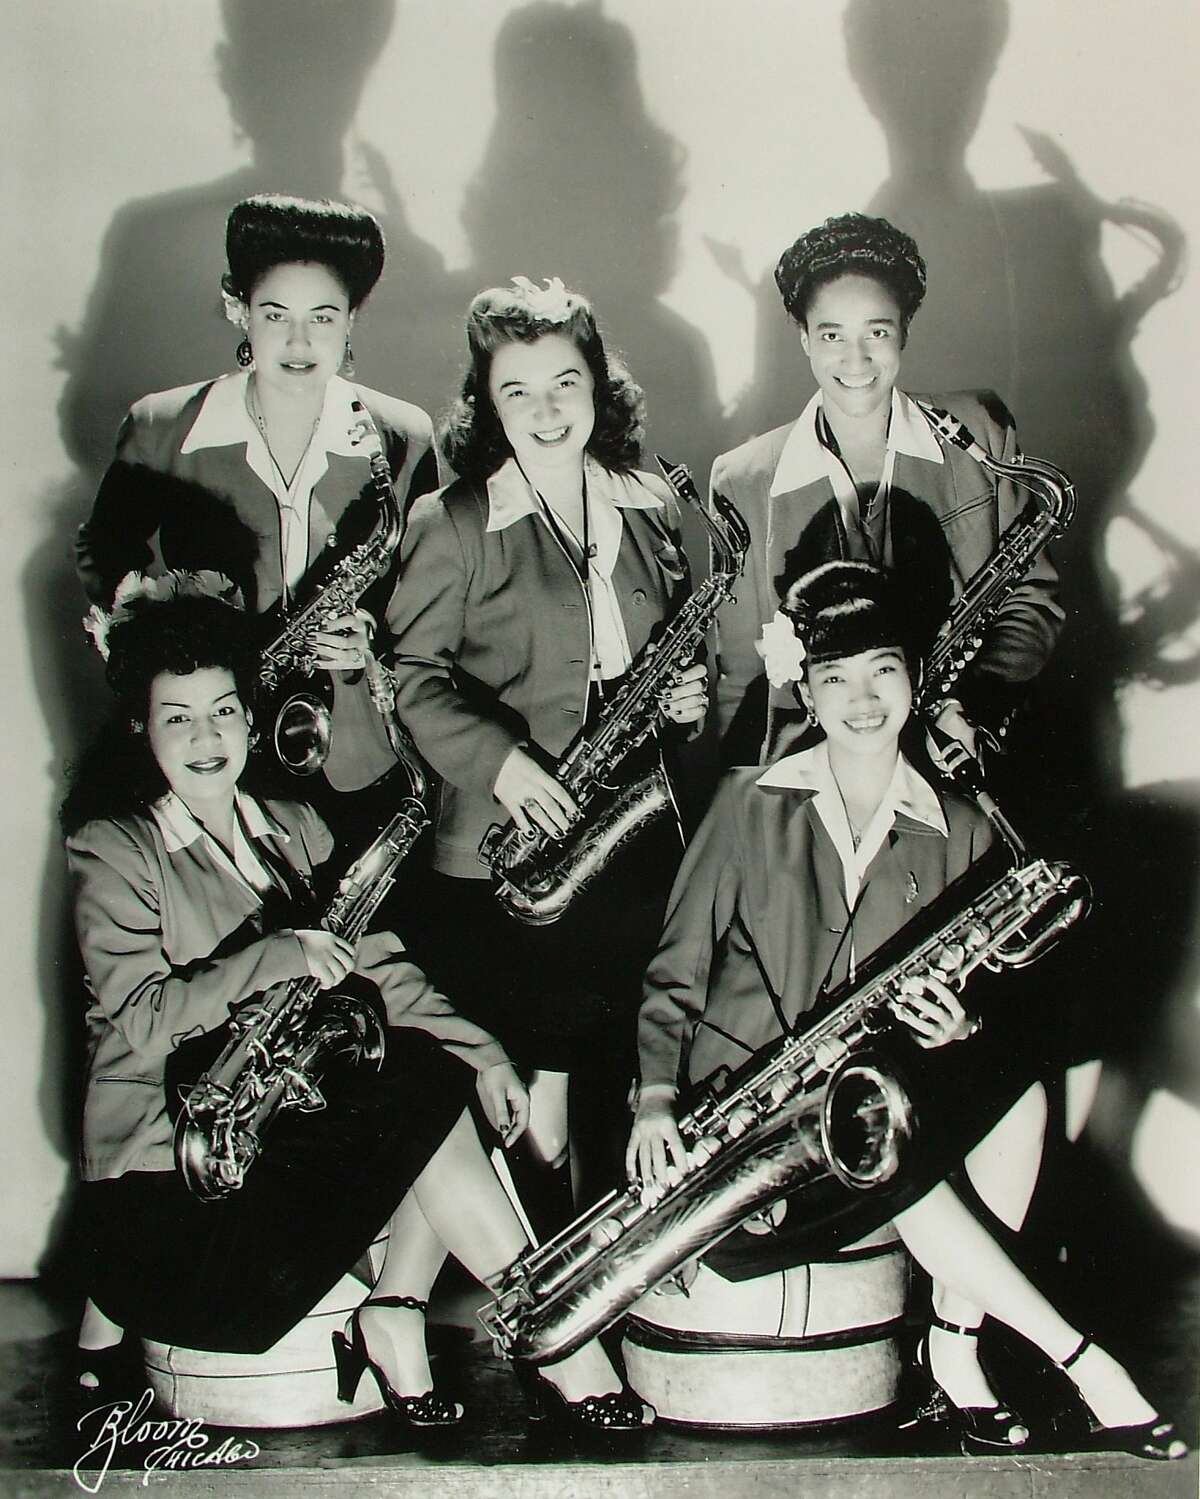 The Sax Section of The International Sweethearts of Rhythm is seen in, "The Girls in the Band."